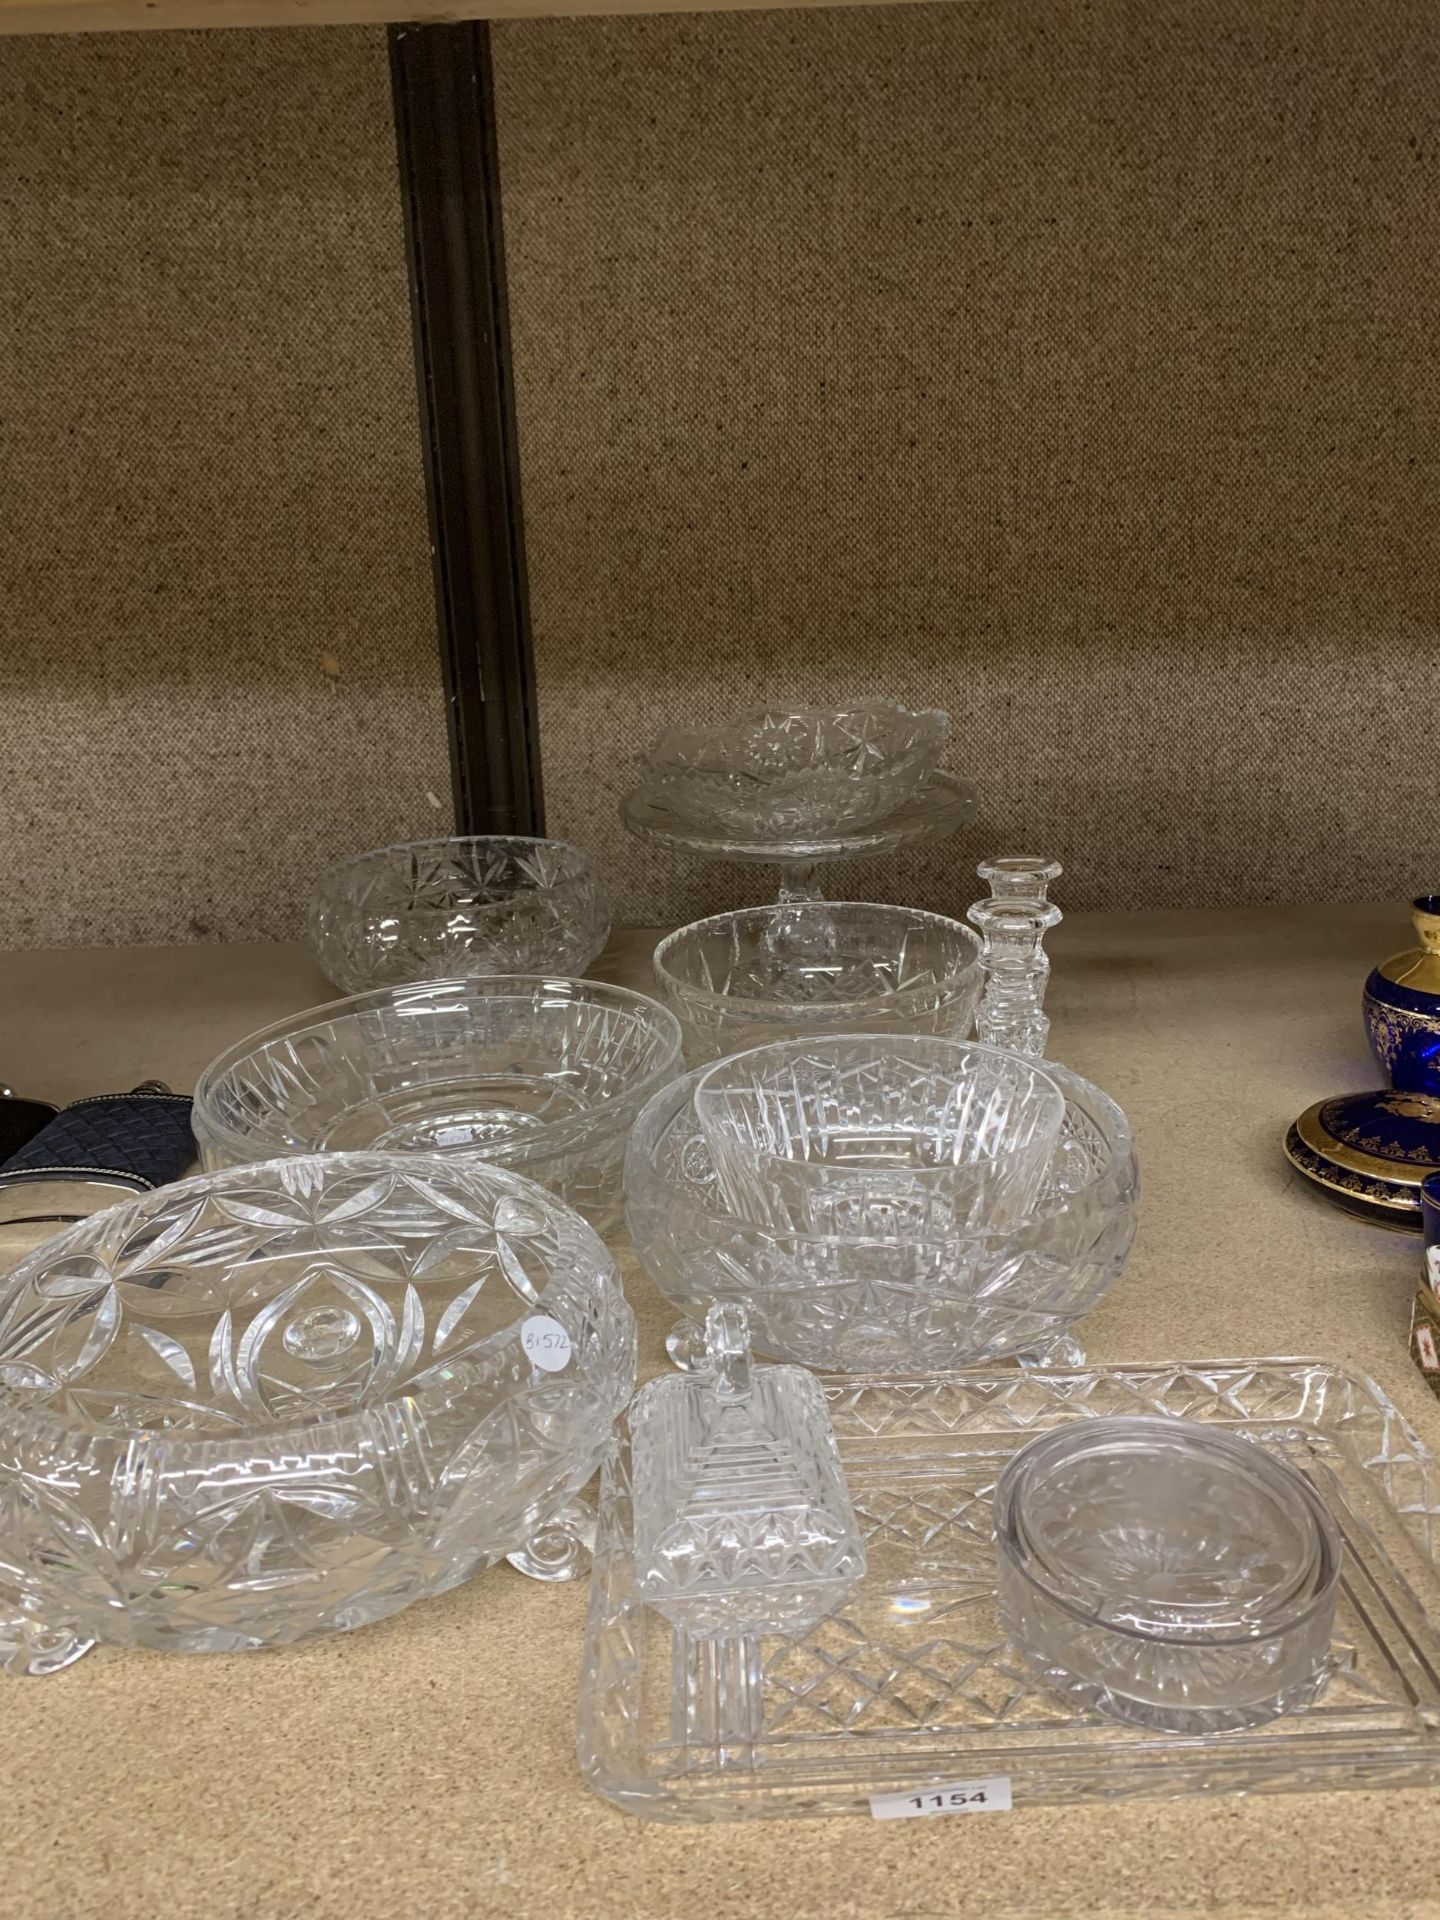 A LARGE QUANTITY OF GLASSWARE TO INCLUDE CUT GLASS BOWLS, CANDLESTICKS, A CAKE STAND, PART